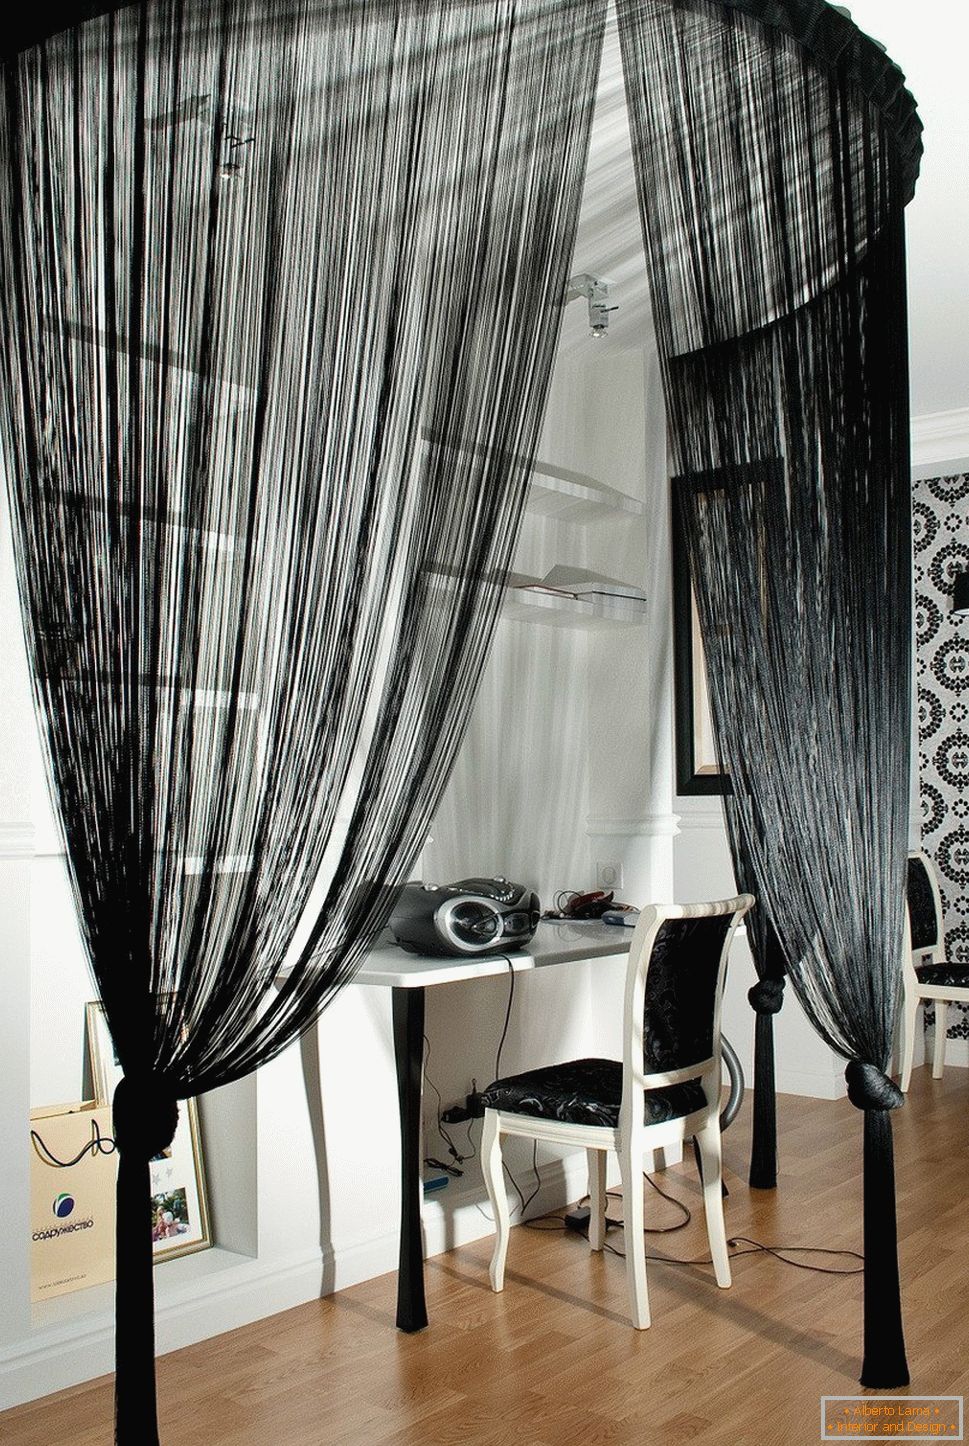 Interesting application of curtains